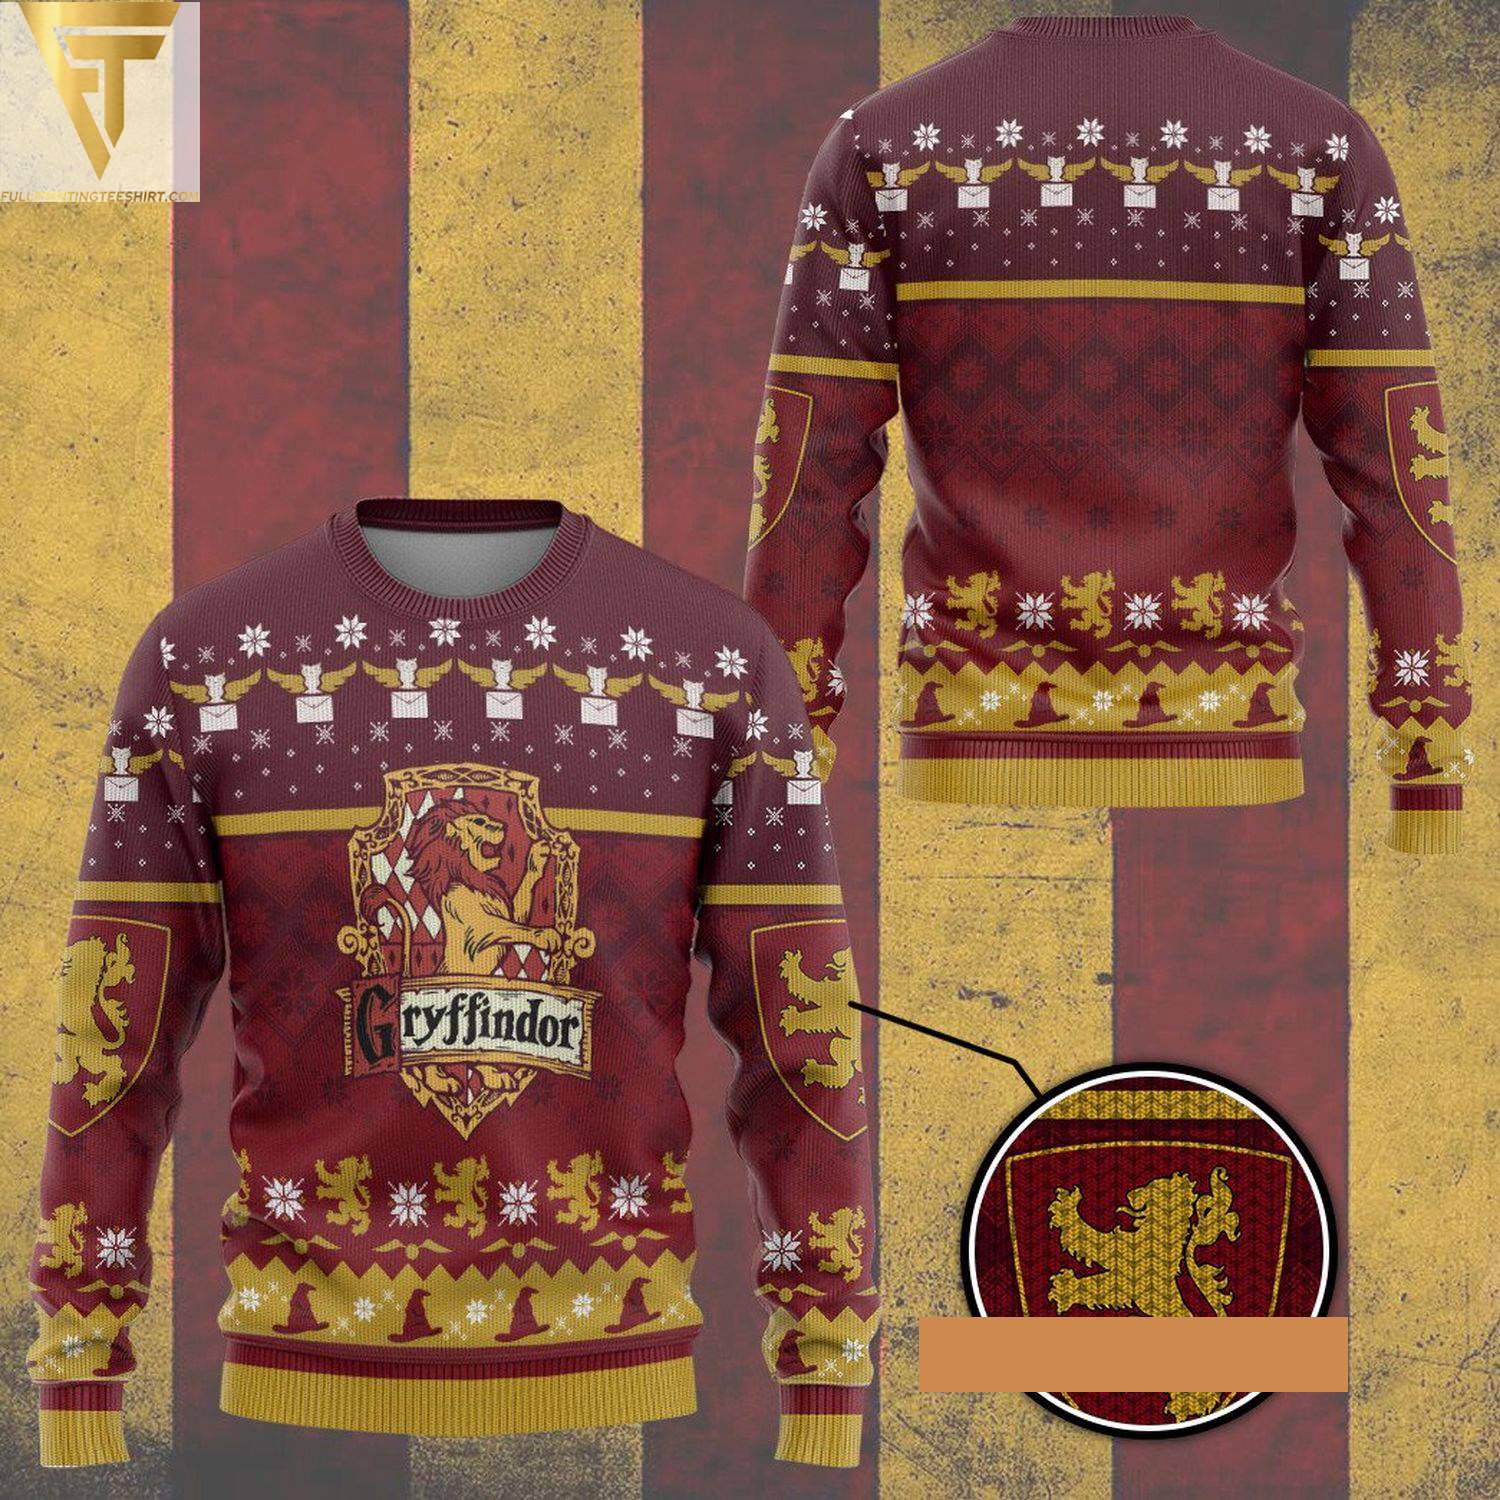 Harry potter gryffindor house ugly christmas sweater - Copy (2)